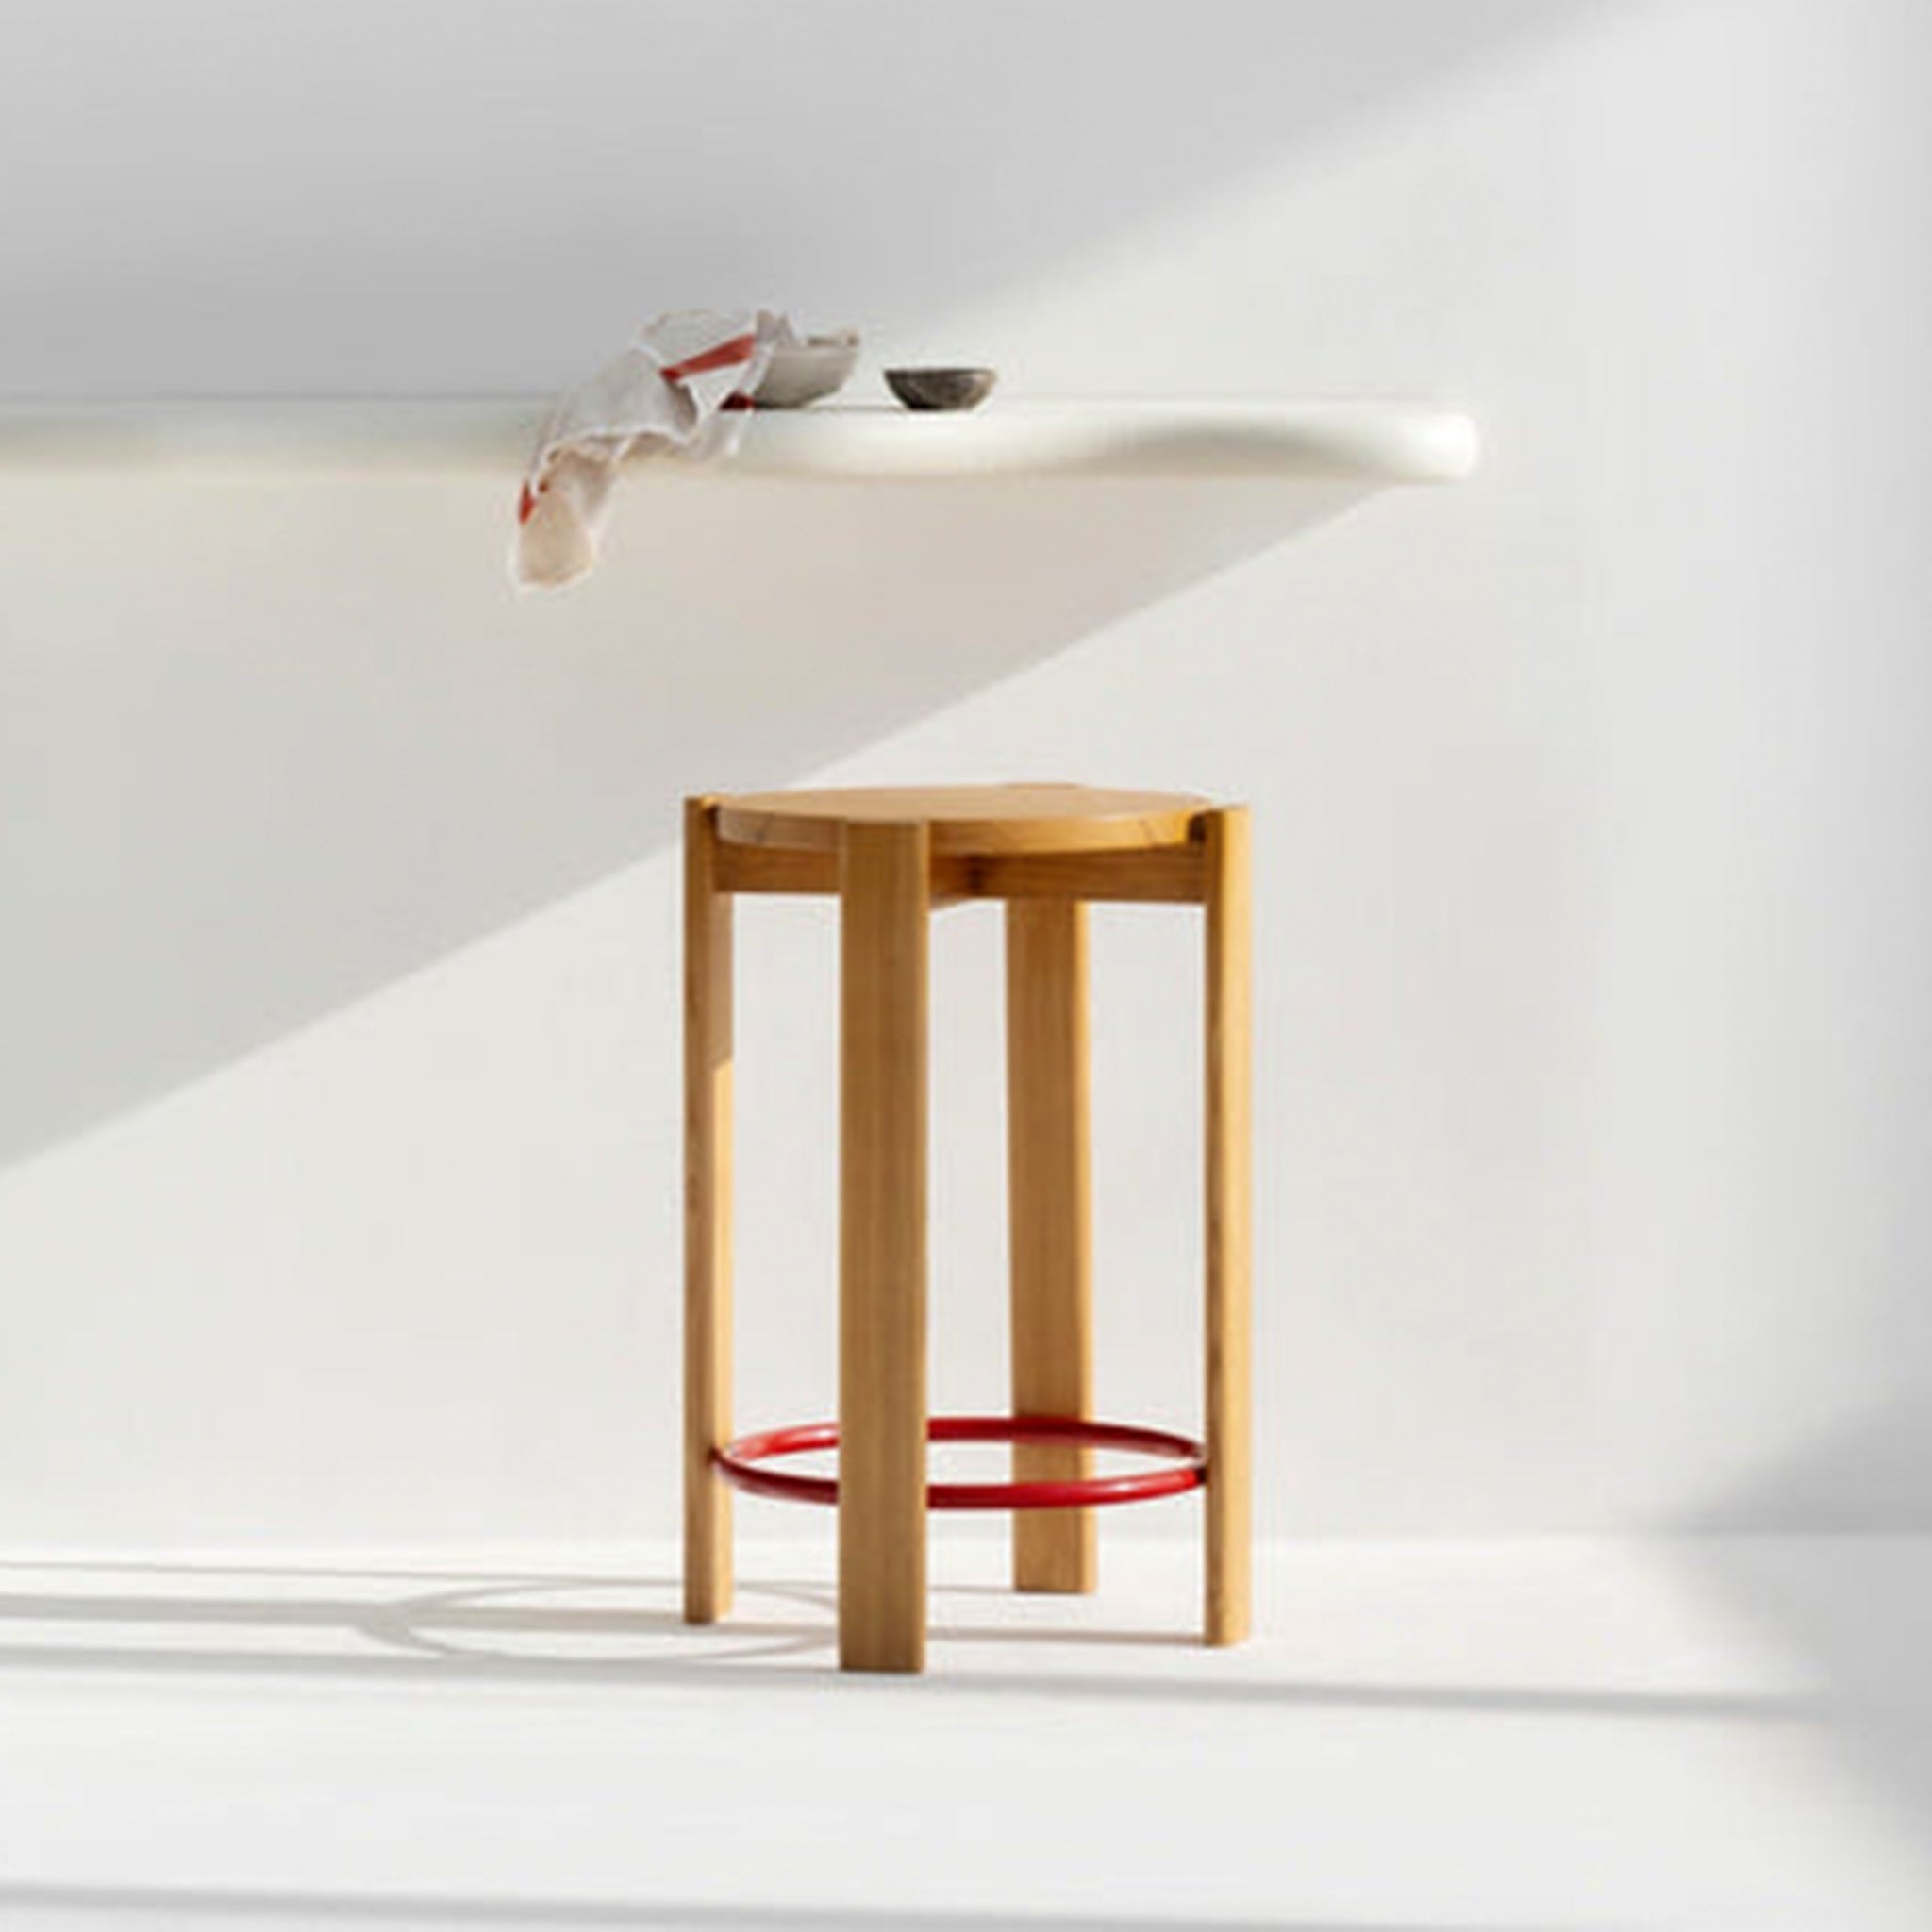 Wooden tall stool with a red circular footrest placed in a bright, minimalist kitchen with a floating white countertop